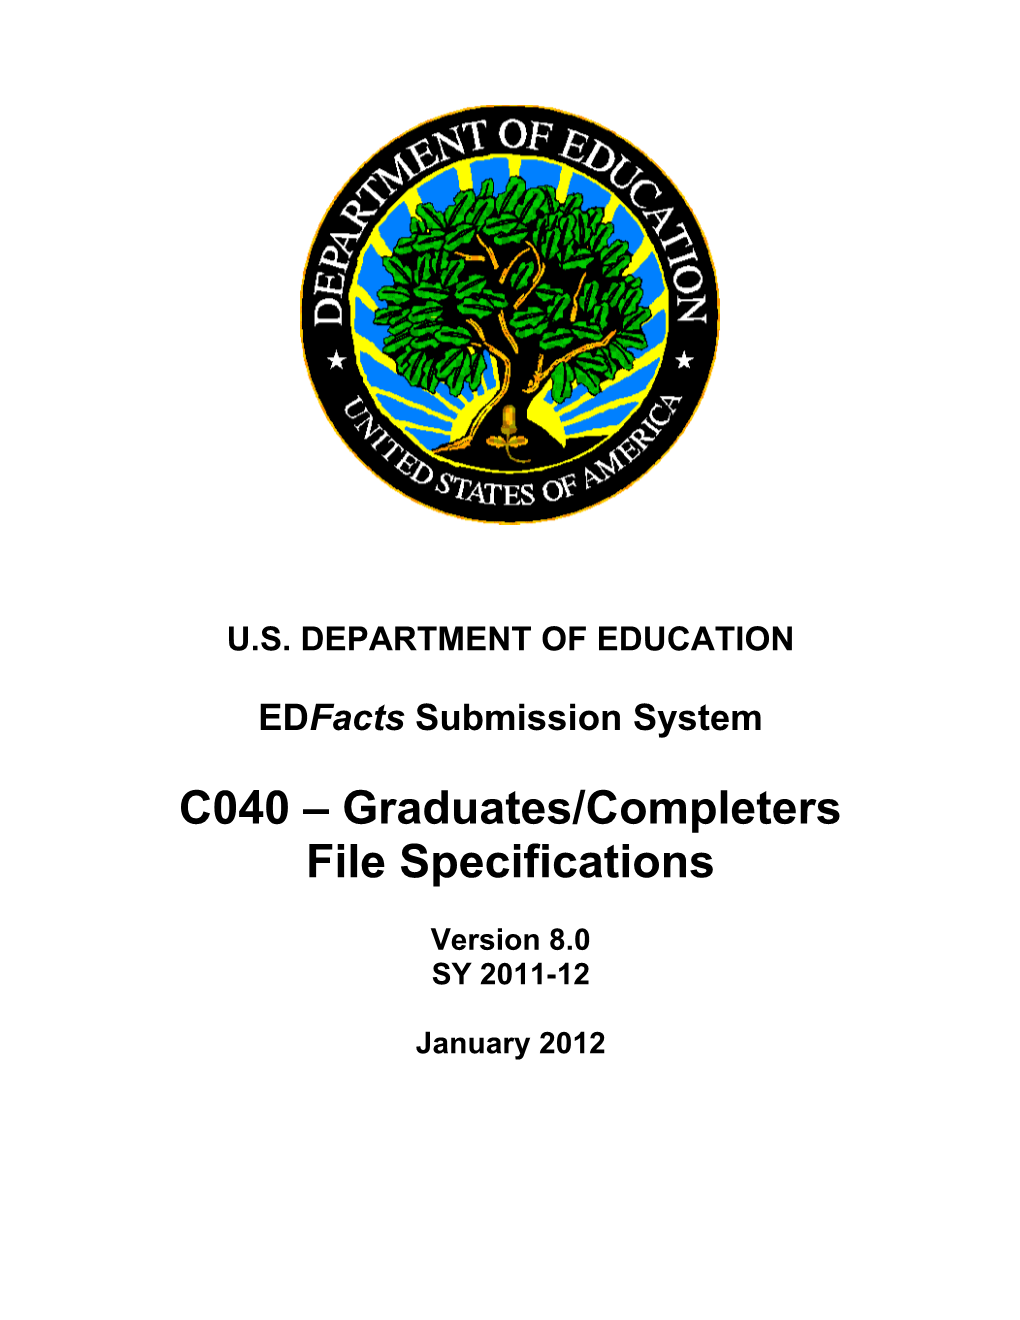 Graduates/Completers File Specifications